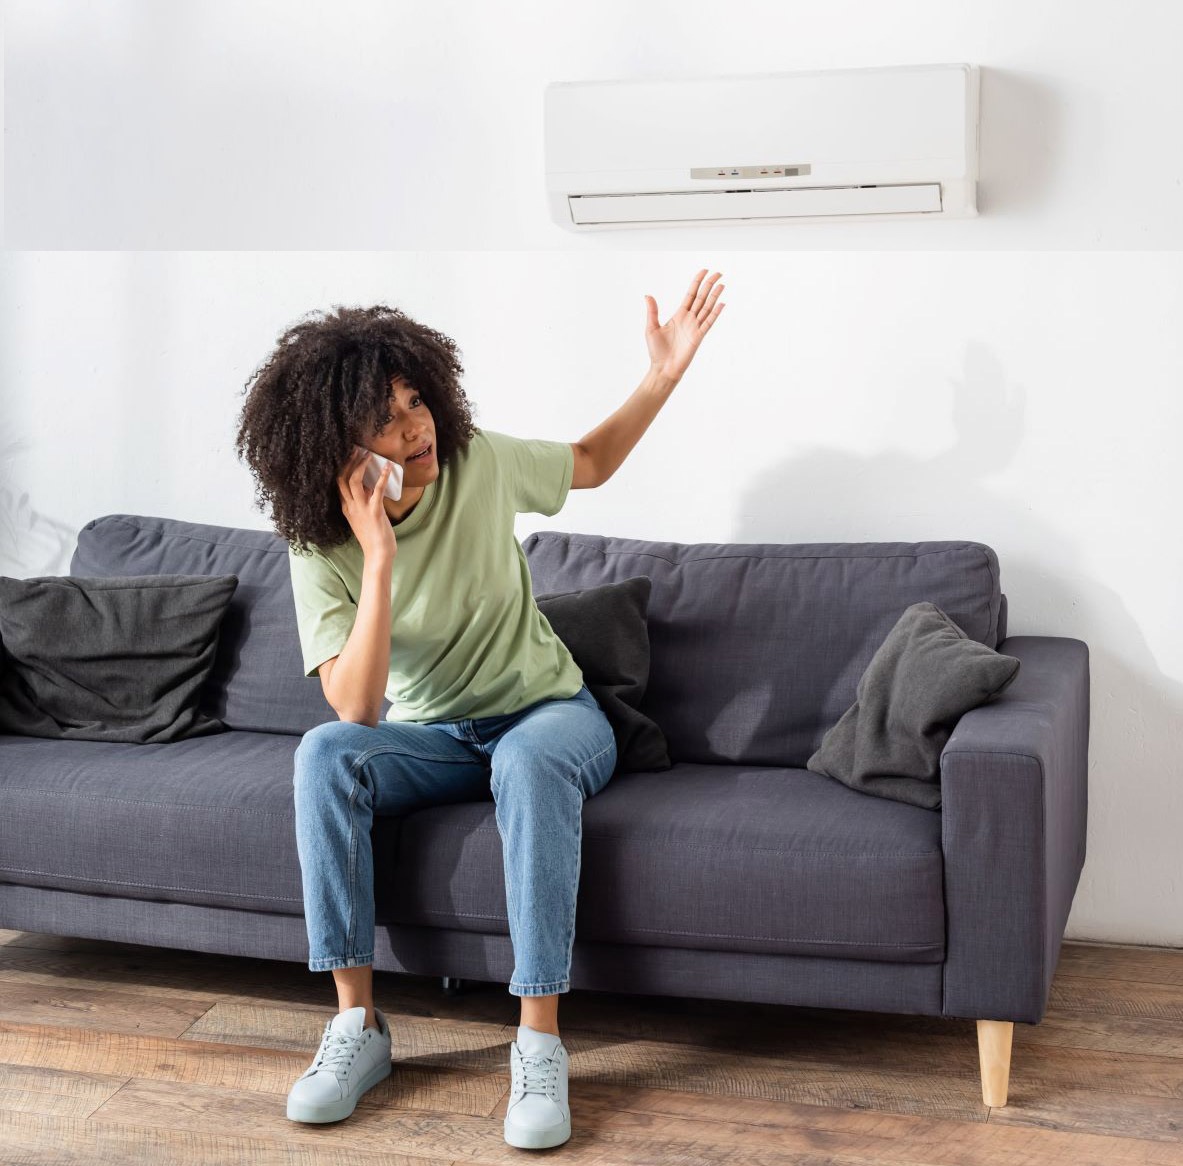 3 Things to Know When Calling Your HVAC Company